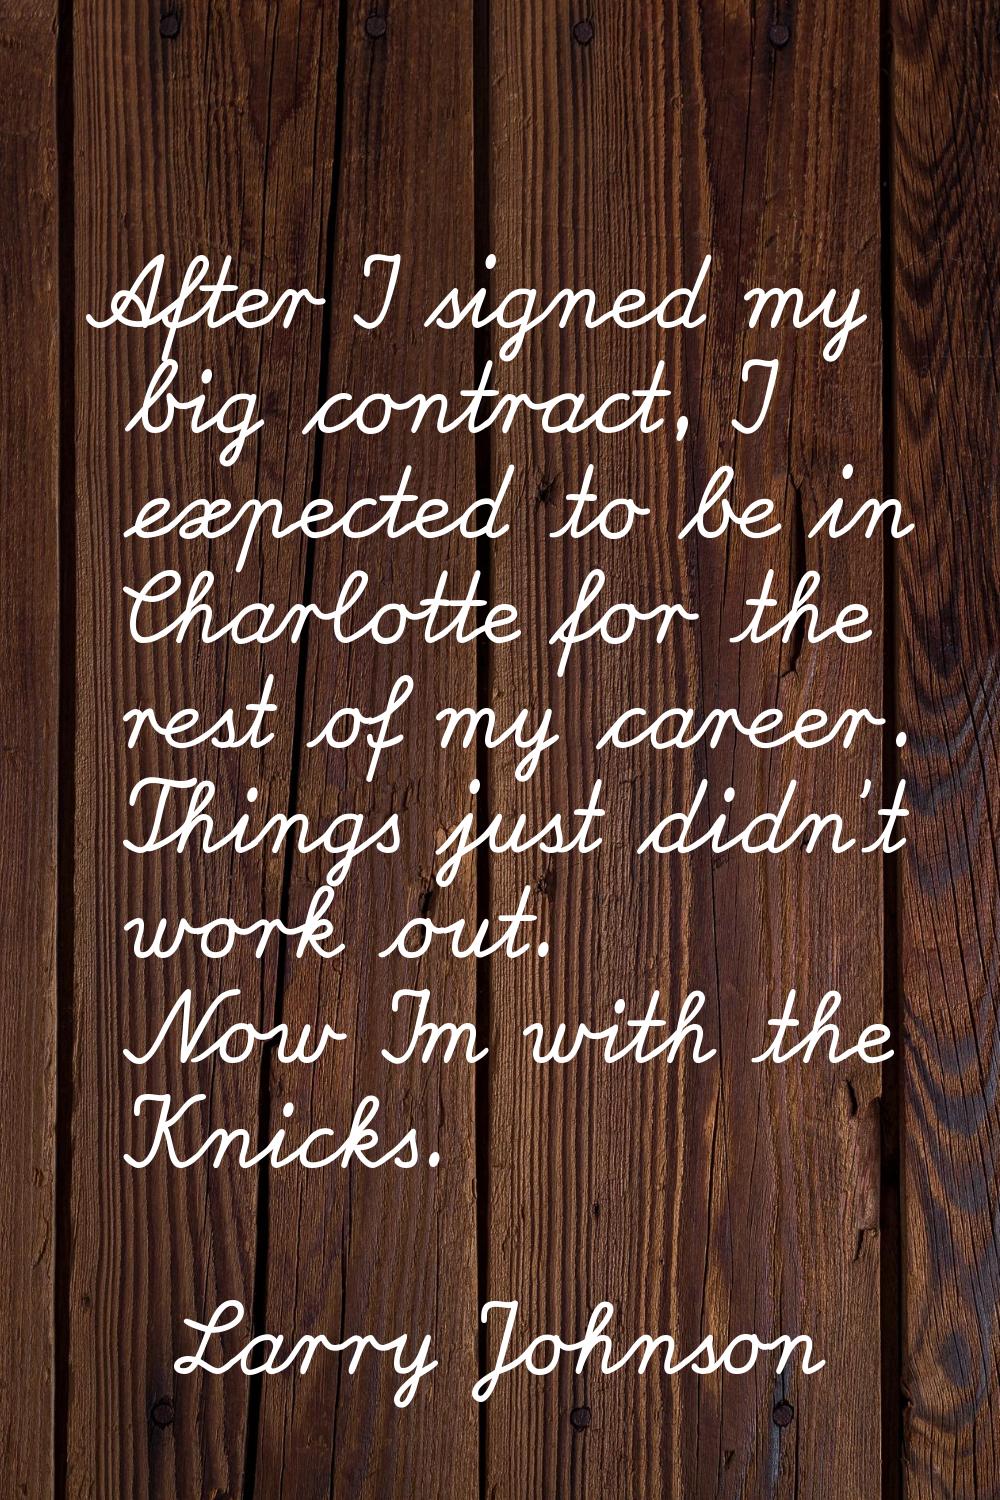 After I signed my big contract, I expected to be in Charlotte for the rest of my career. Things jus